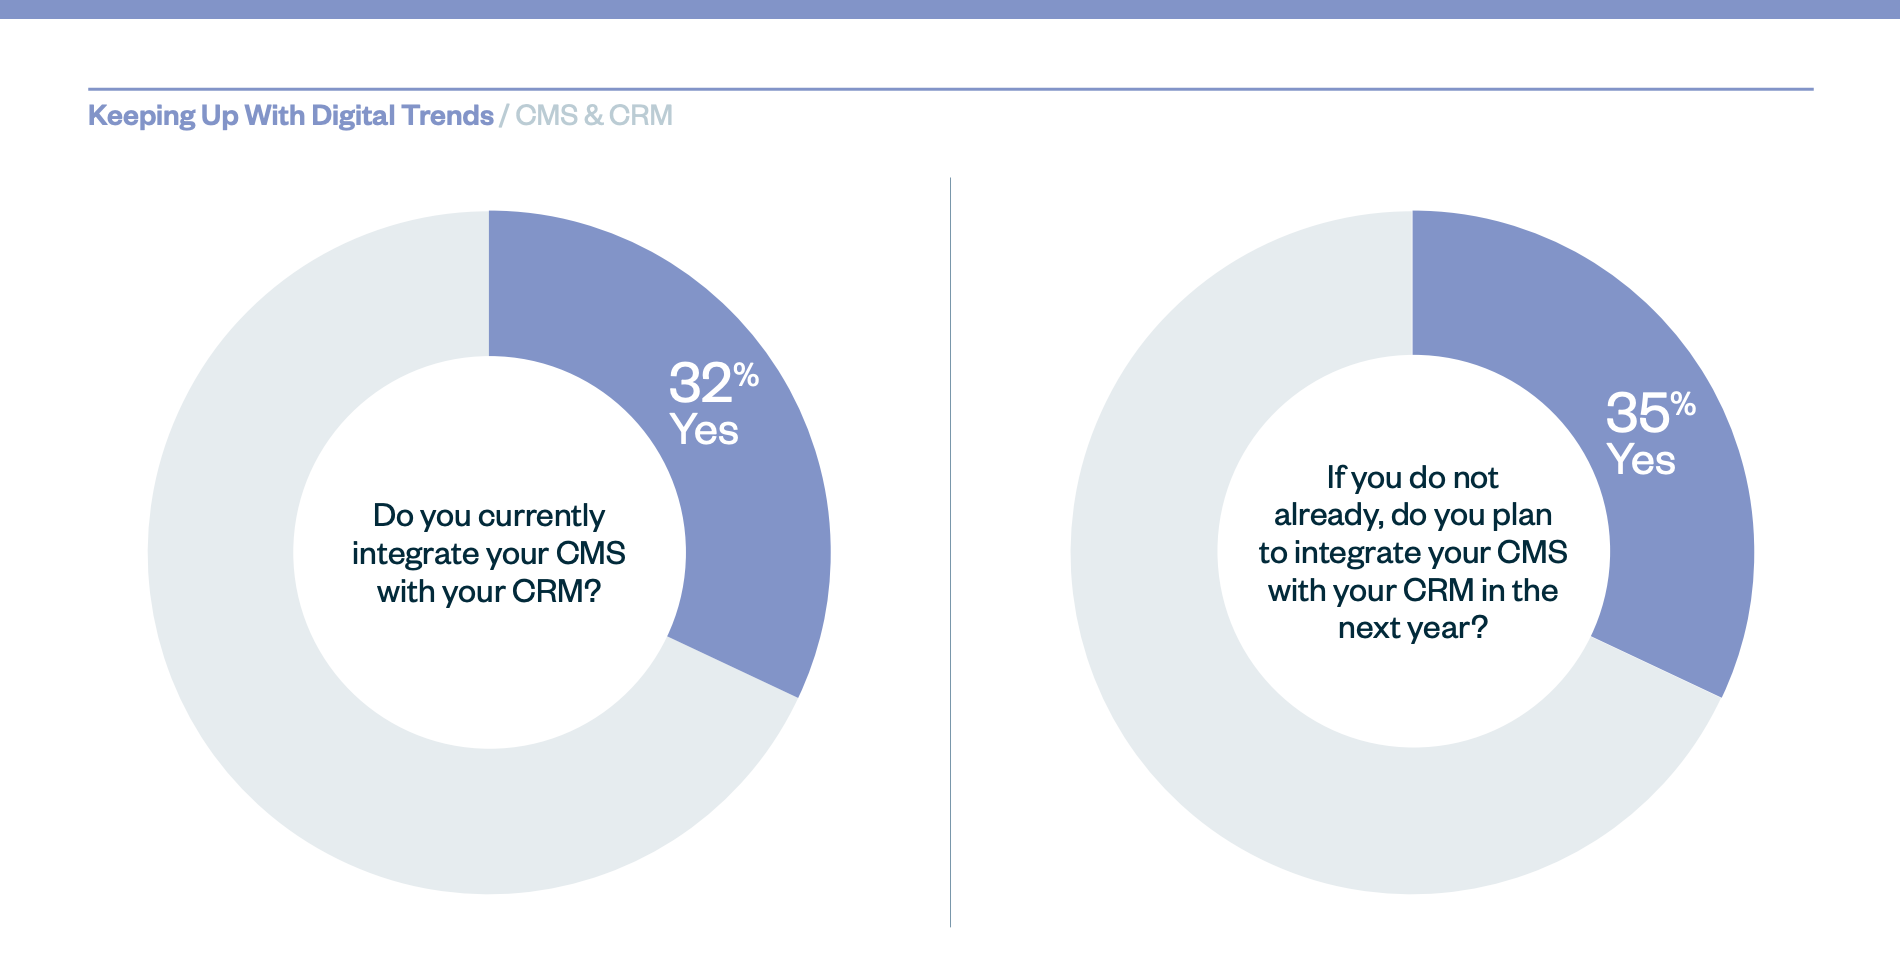 Chart depicting CRM & CMS integration in higher education